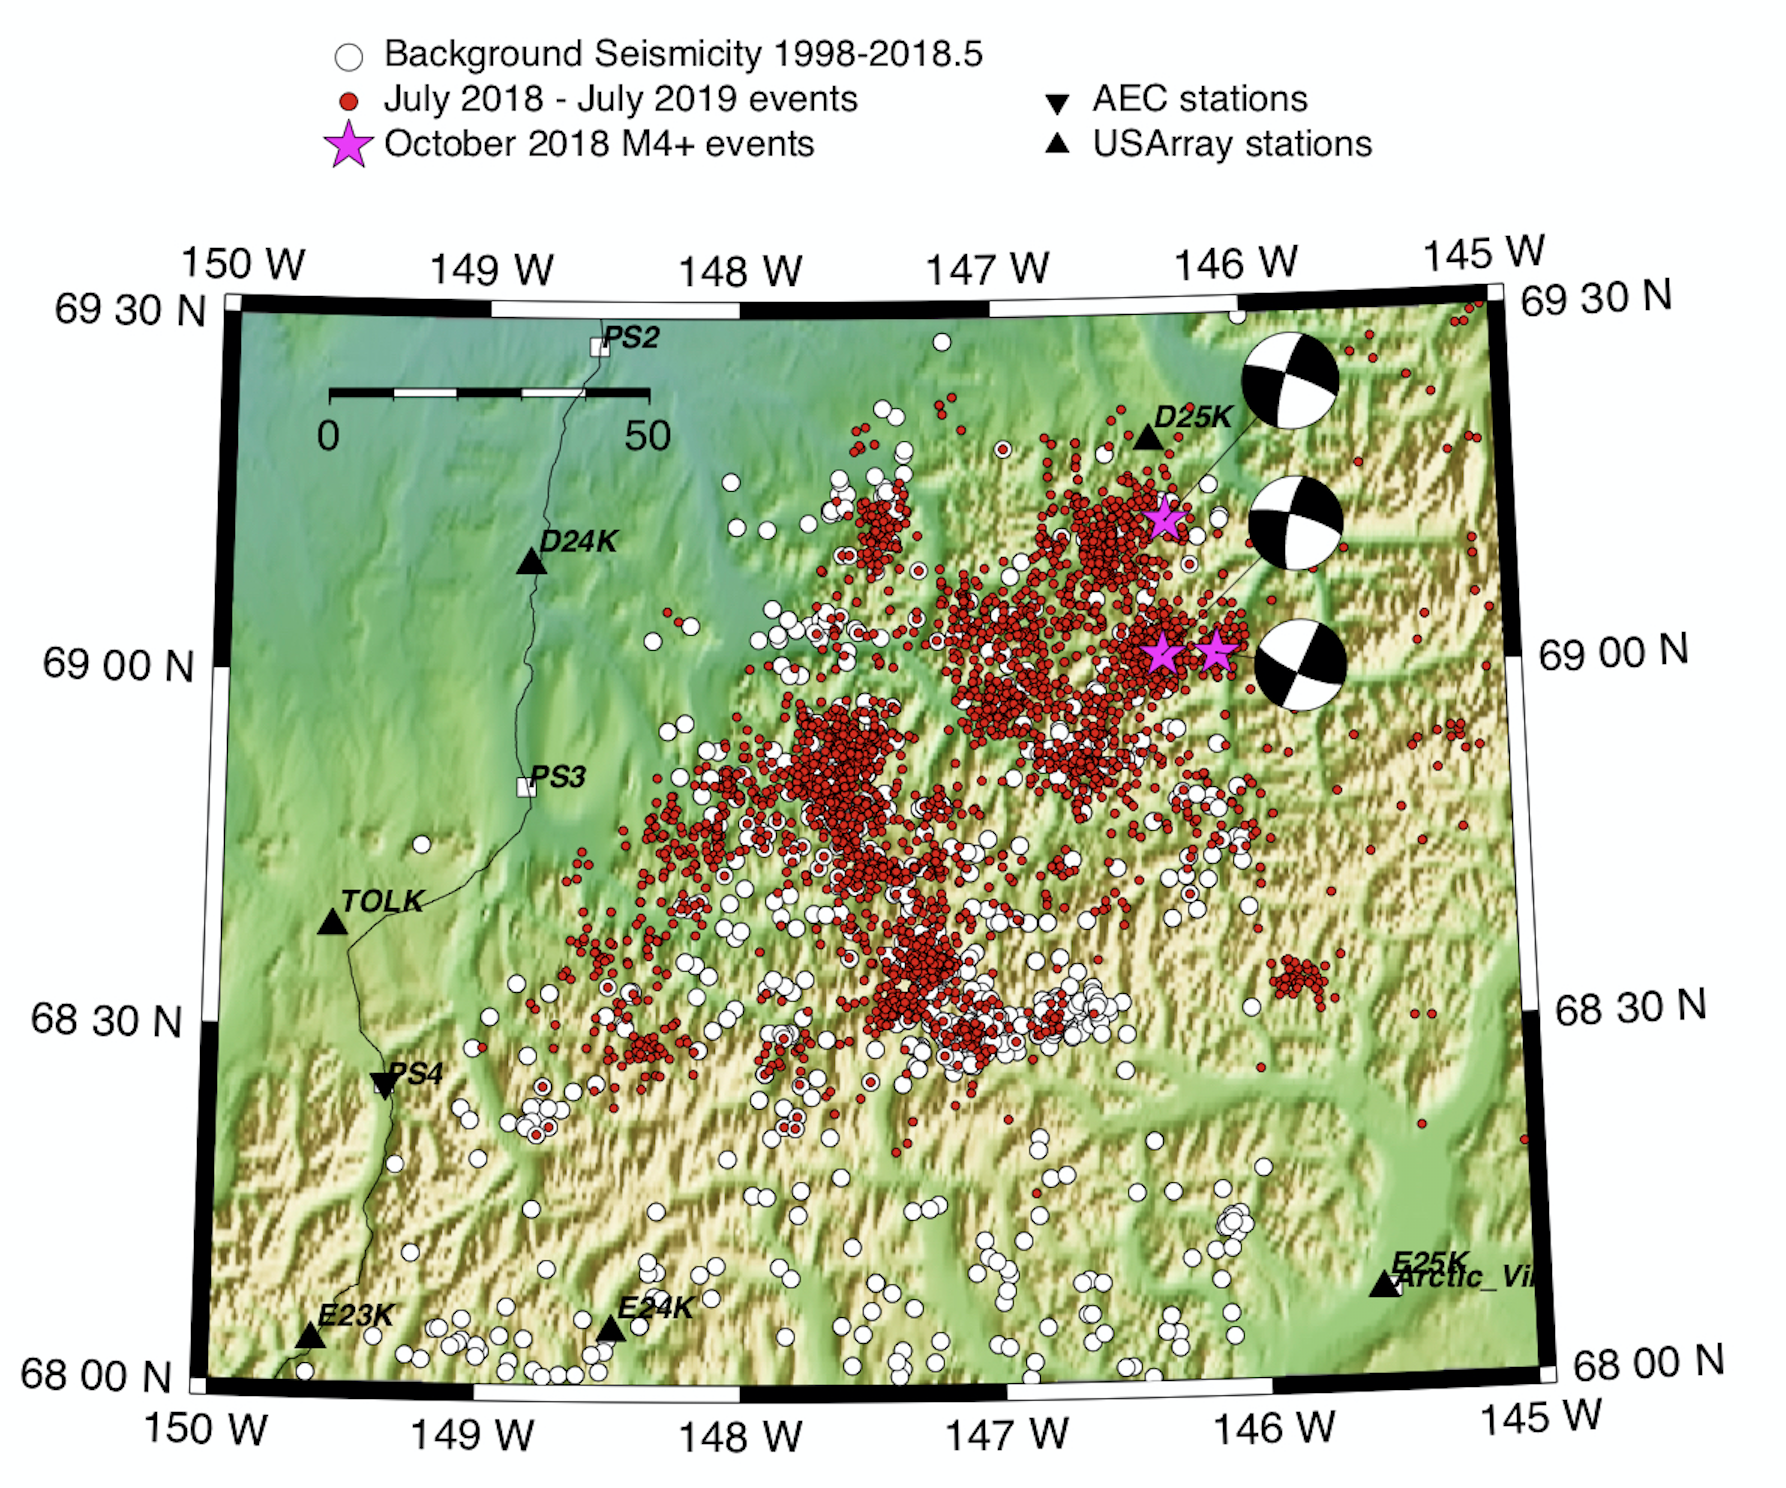 Map show cluster of July 2018-July 2019 earthquakes, with several tighter concentrations of events. Stars show 3 magnitude 4+ events in October 2018 in the northwest of the activity area.